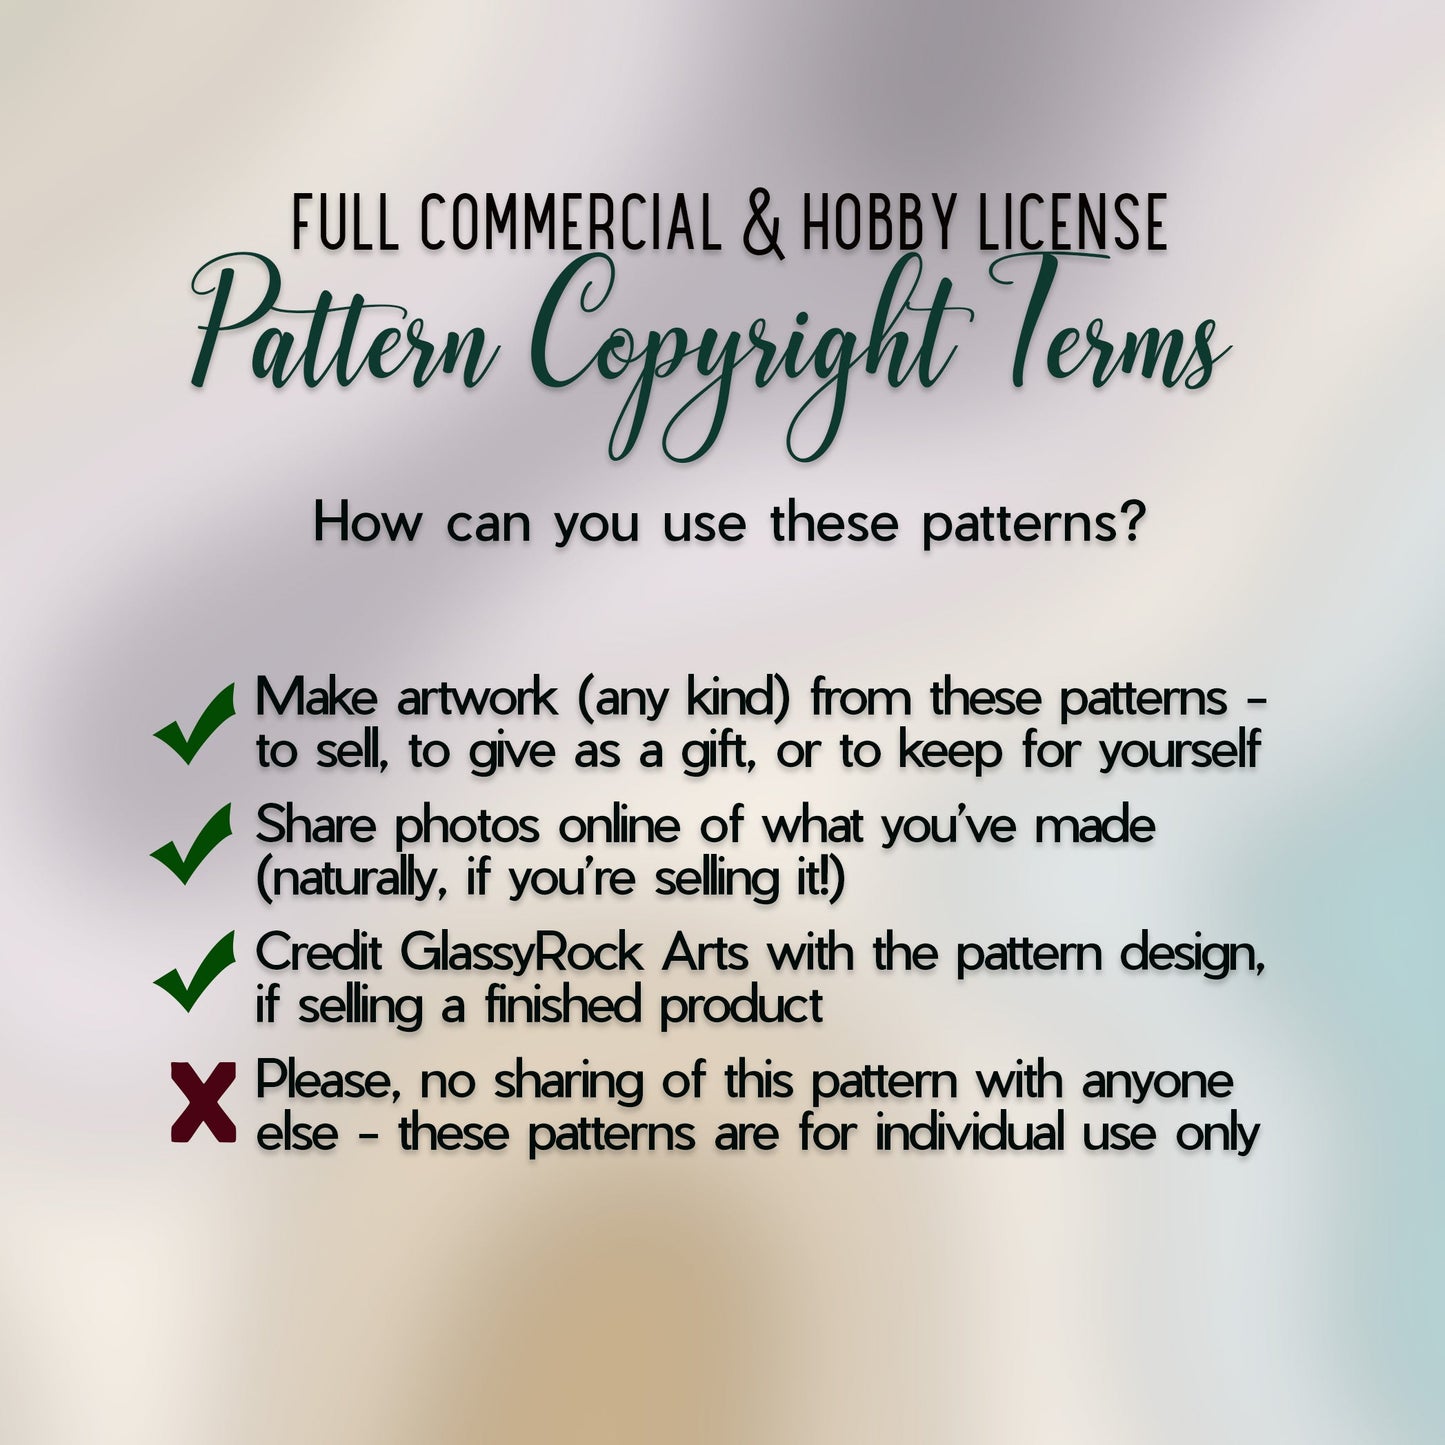 Full commercial and hobby license pattern copyright terms for GlassyRock Arts stained glass patterns